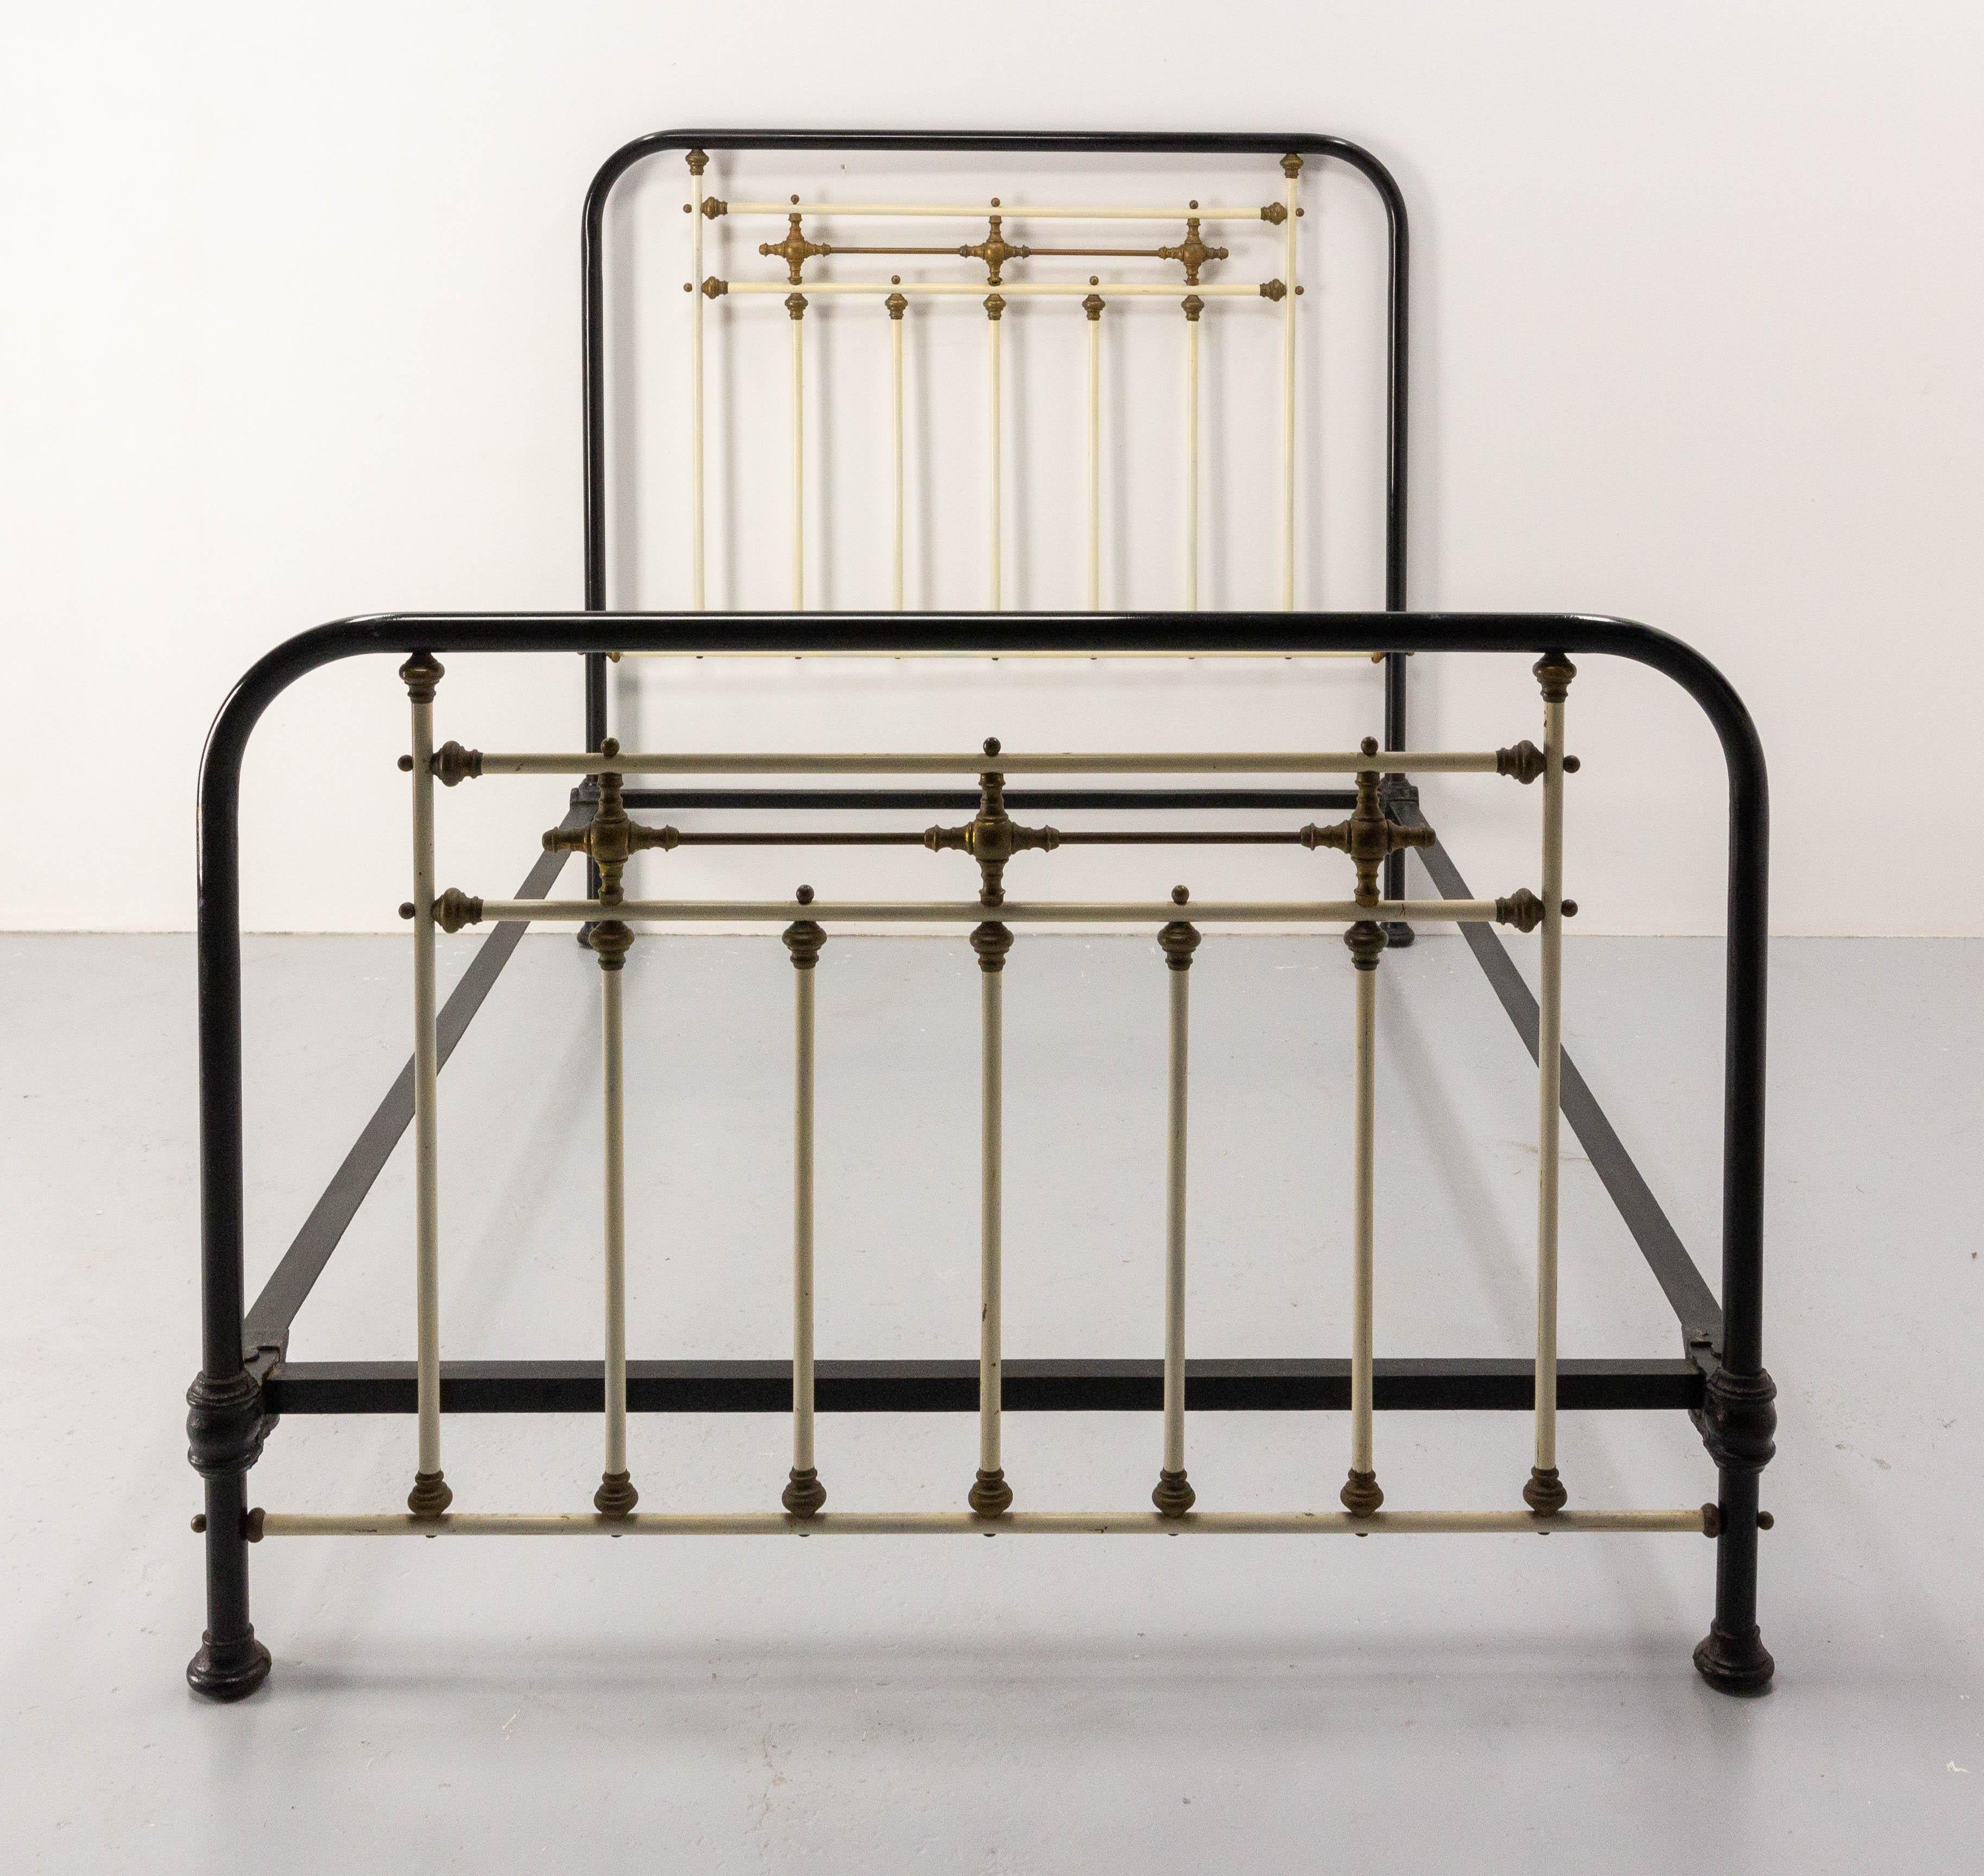 French antique bed, circa 1920
Painted white and black metal, and parts of brass

This single bed will need a tailored bedding mattress on either wooden slats or box base (not included) of 48.62 x 74.80 in. ( 123.5 x 190 cm)
Good antique